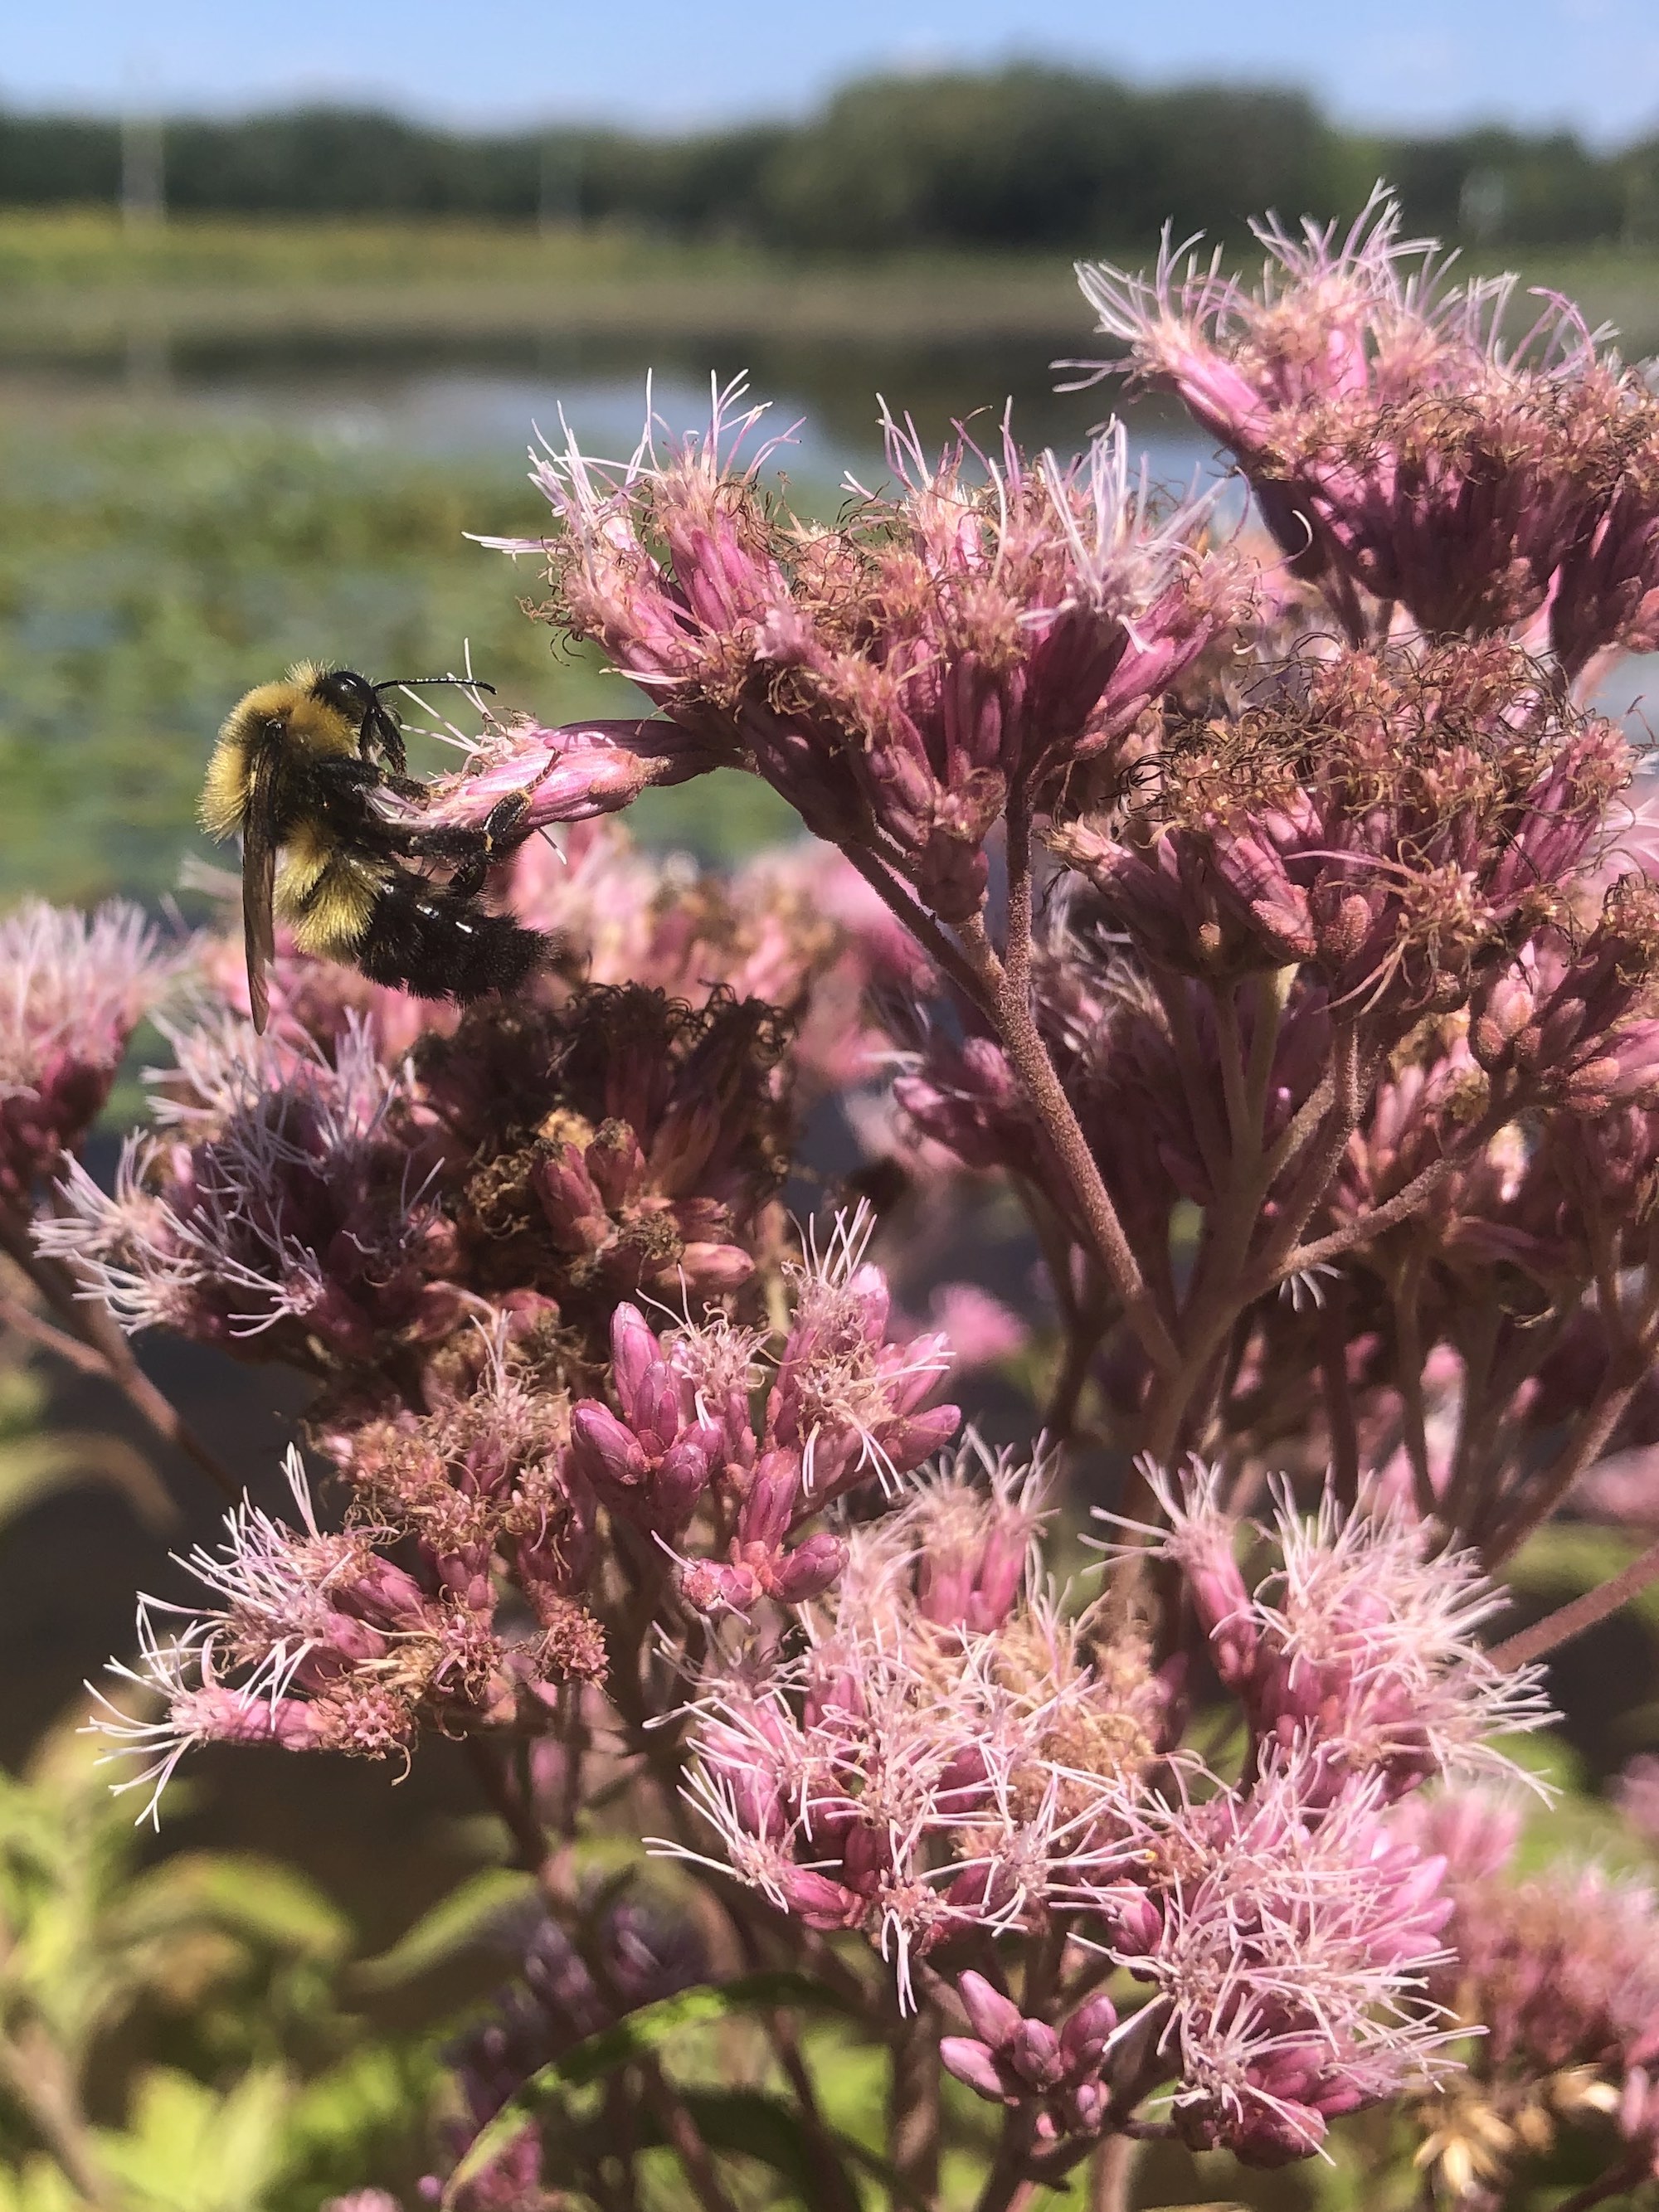 Spotted Joe-Pye Weed on shore of Vilas Park lagoon in Madison, Wisconsin on August 14, 2021.